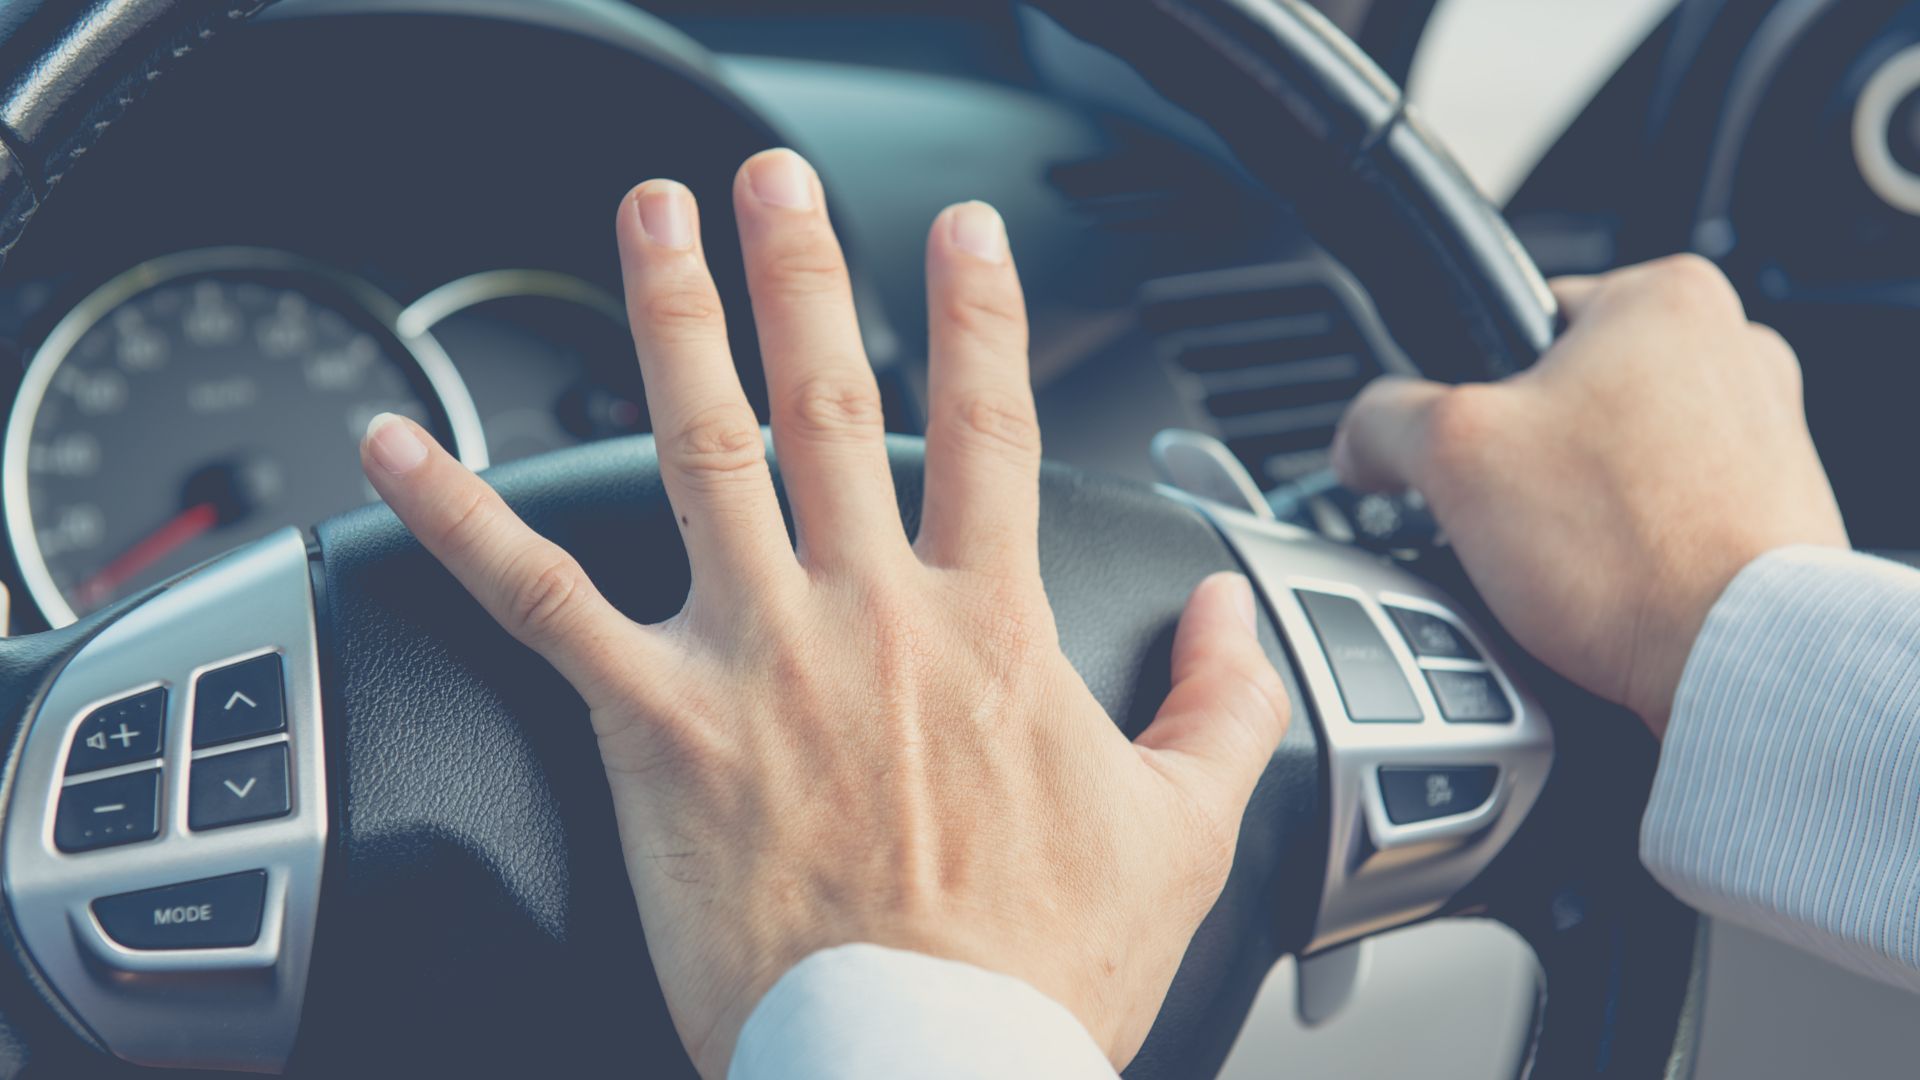 habits that annoy drivers the most